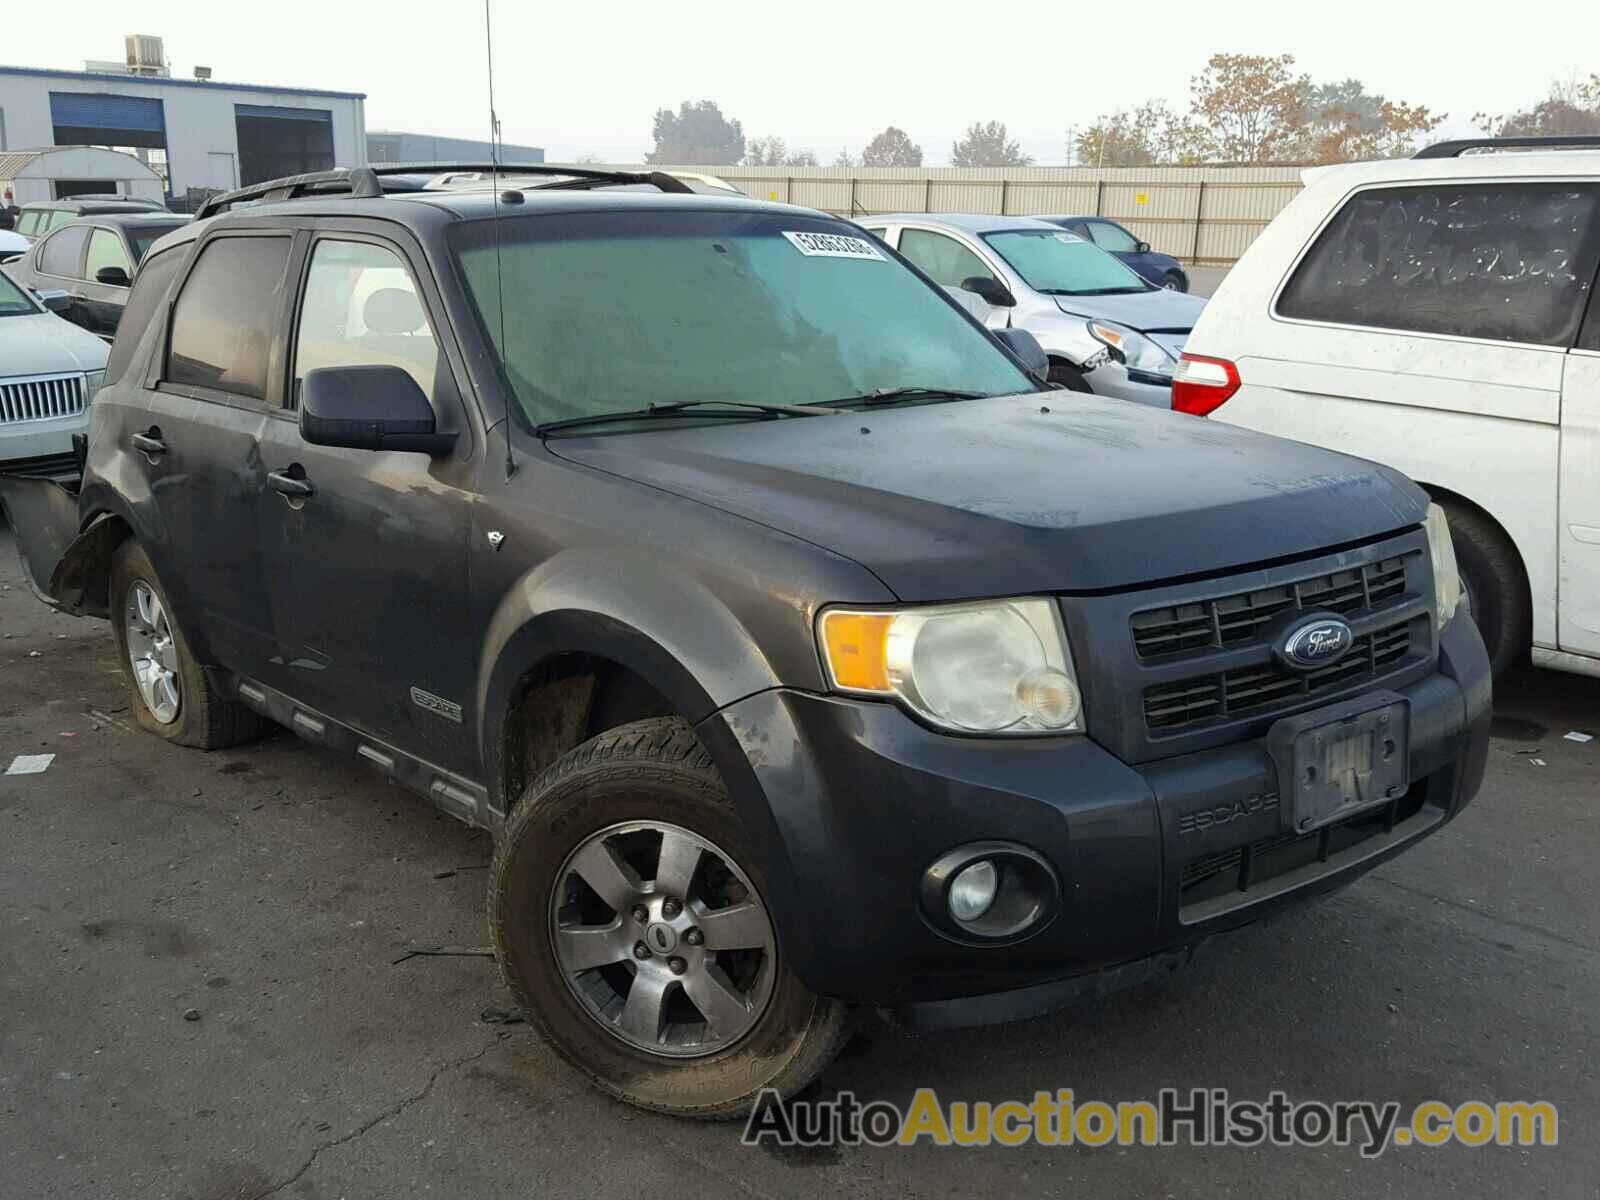 2008 FORD ESCAPE LIMITED, 1FMCU04168KD33061